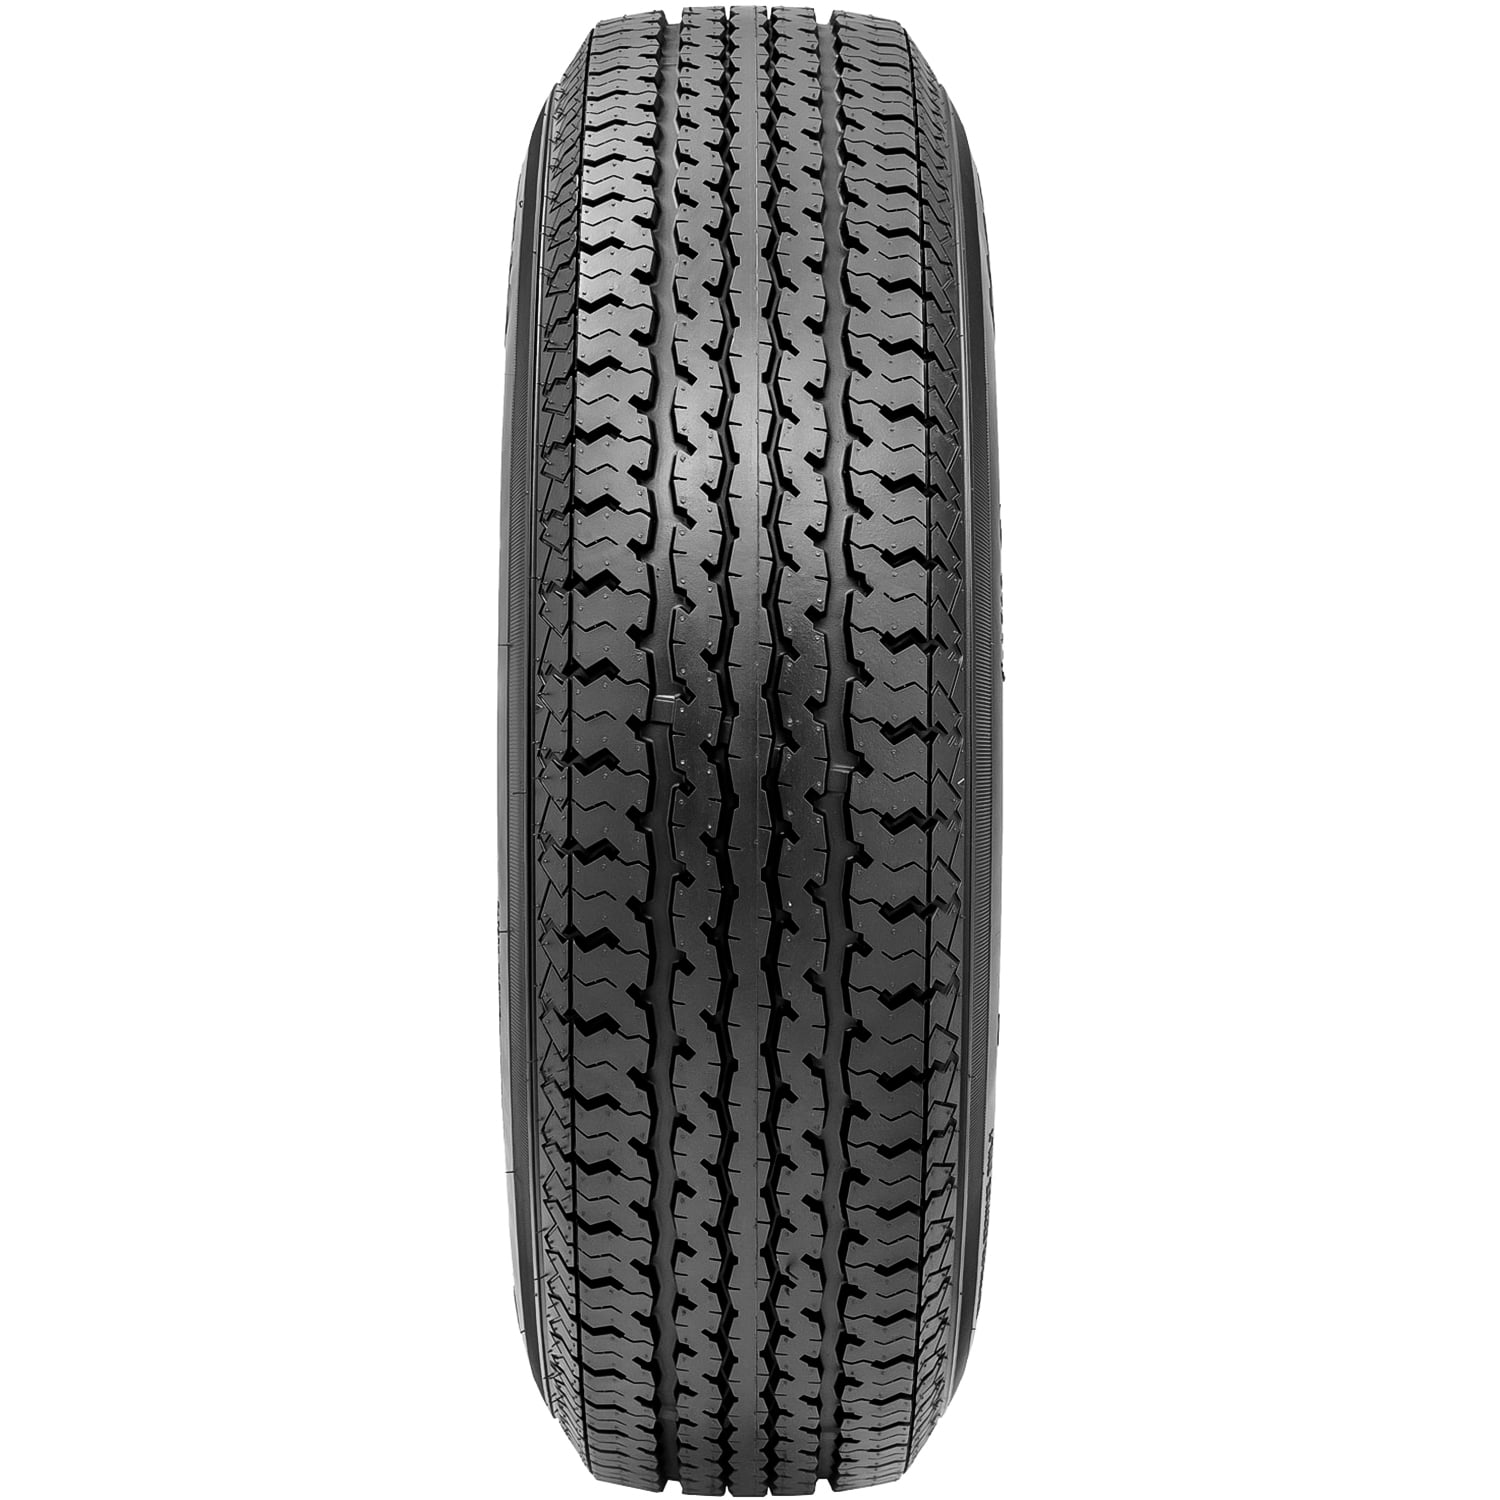 2 New Maxxis M8008 St Radial St205/75r14 Tires 2057514 205 75 14 